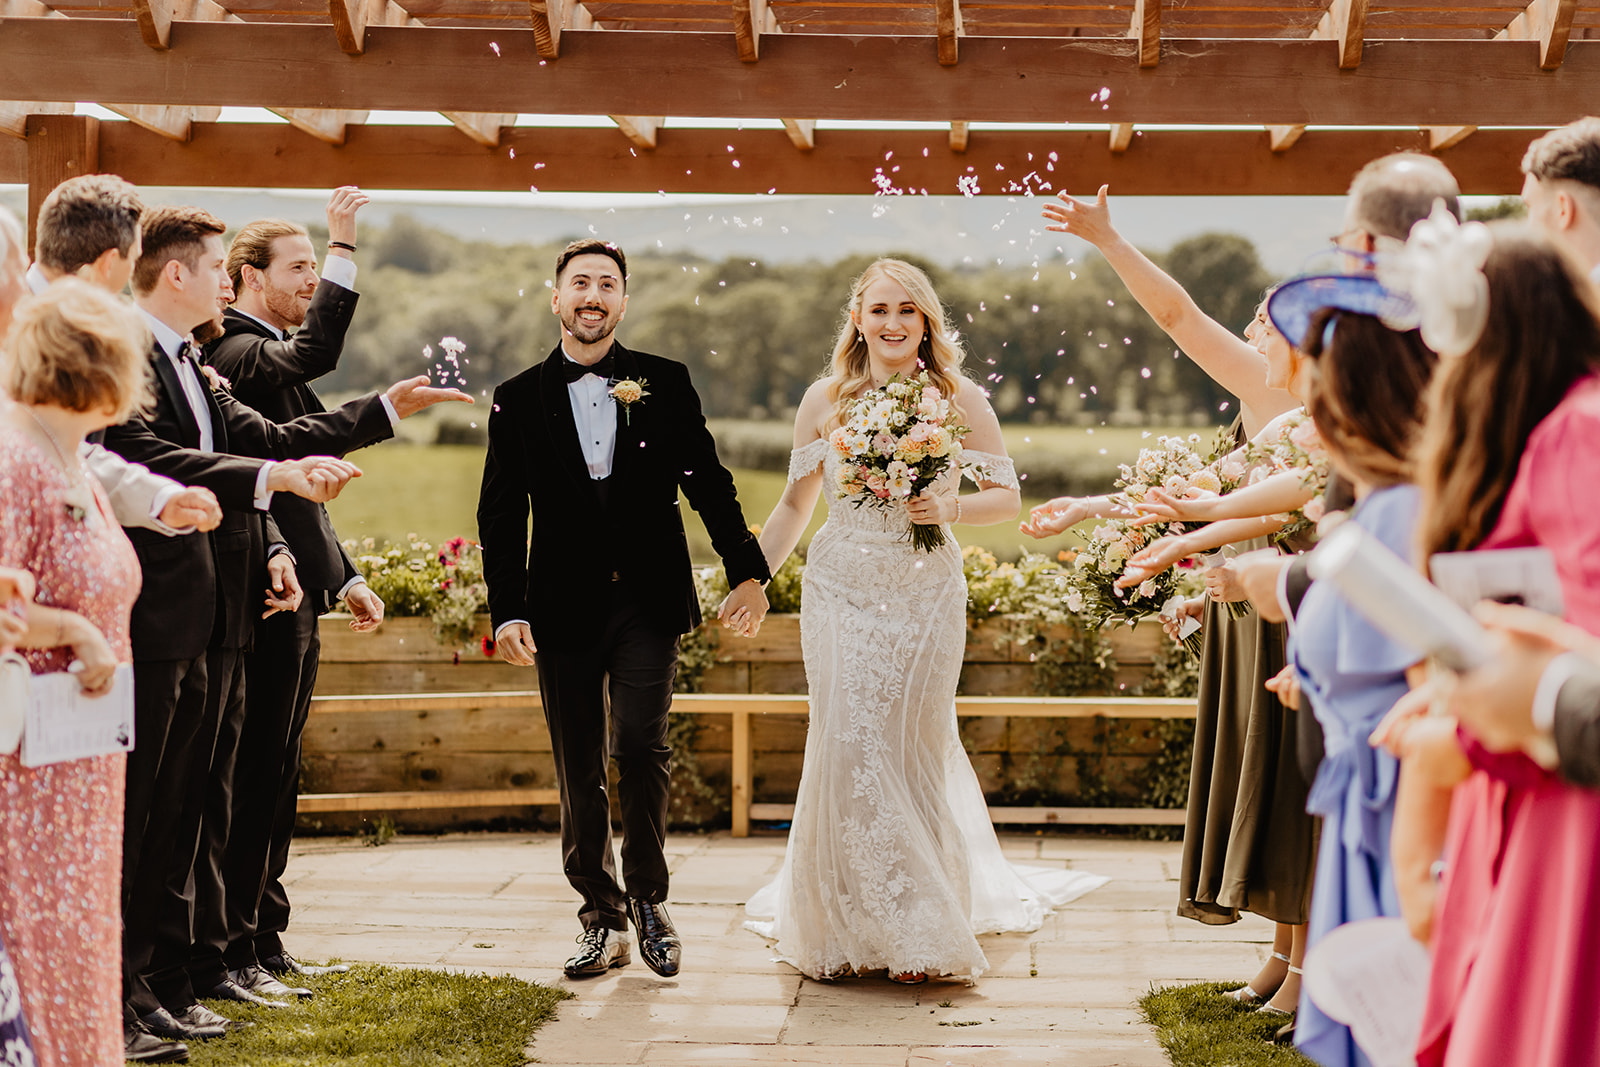 Bride and groom with confetti at a Southlands barn wedding, Sussex. Photo by OliveJoy Photography.